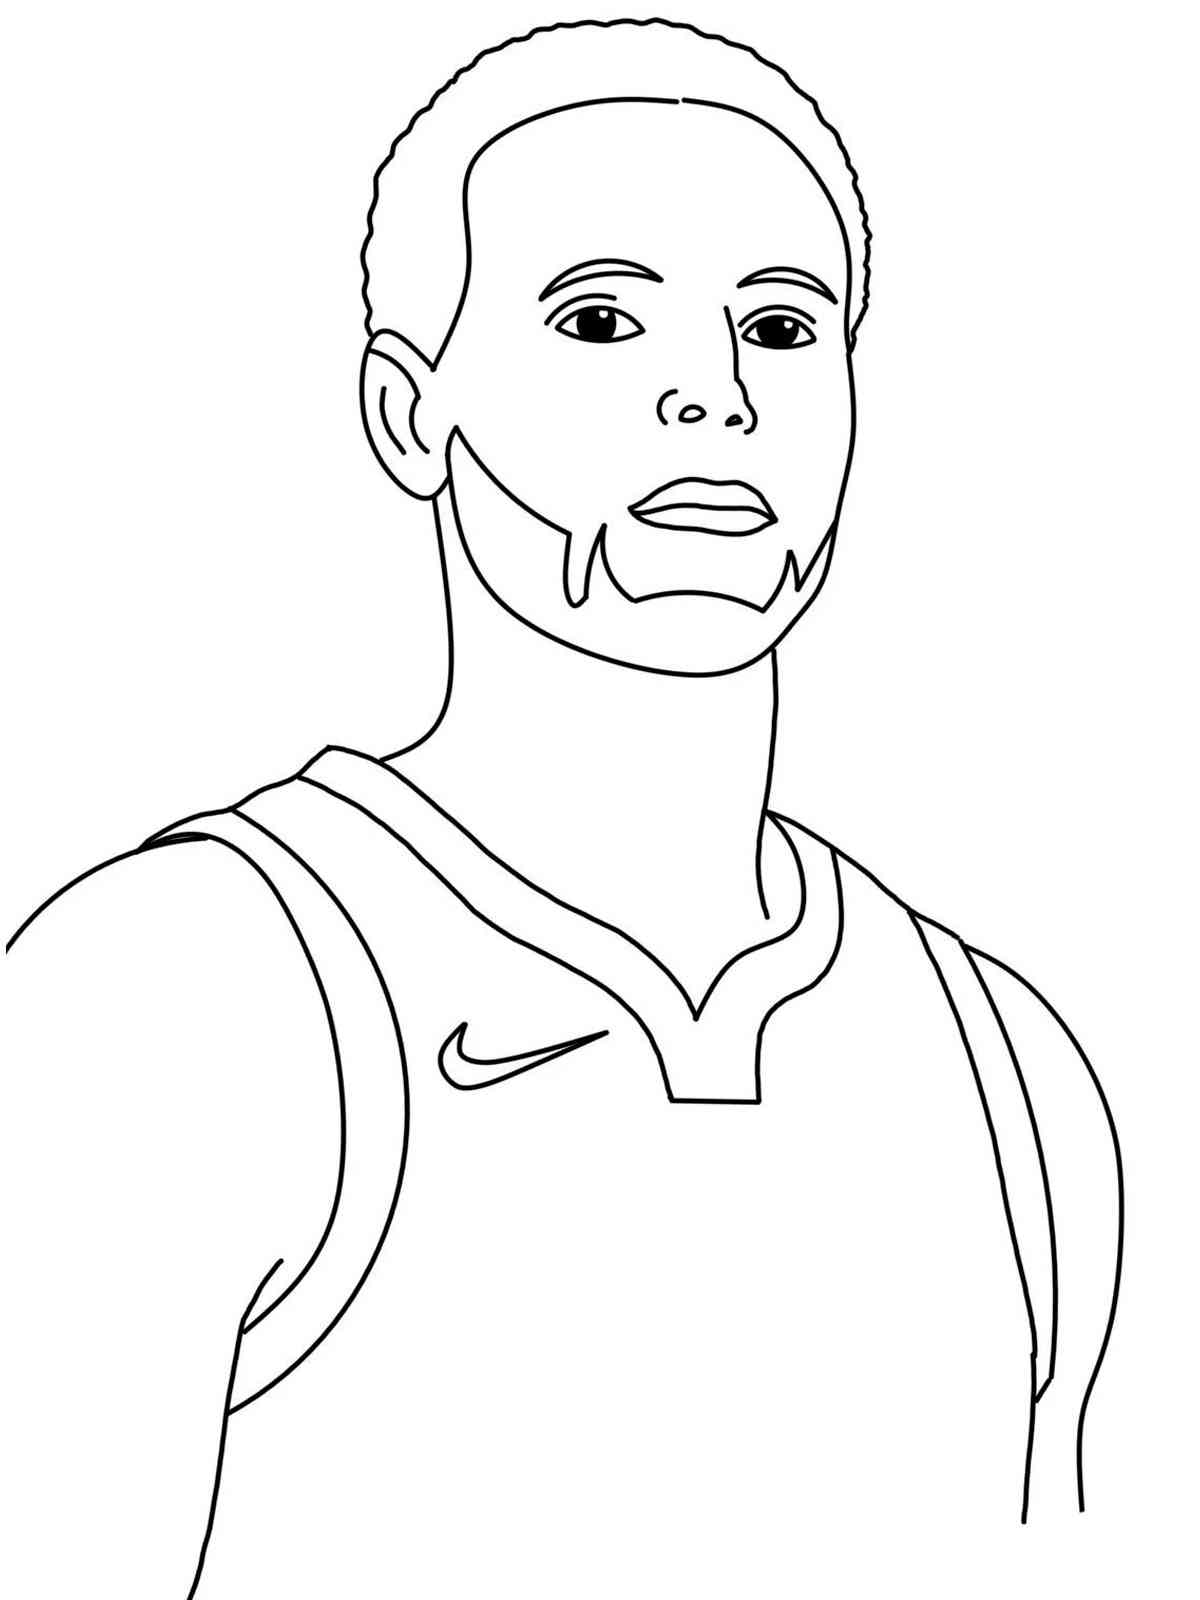 Stephen Curry coloring pages - Free Printable